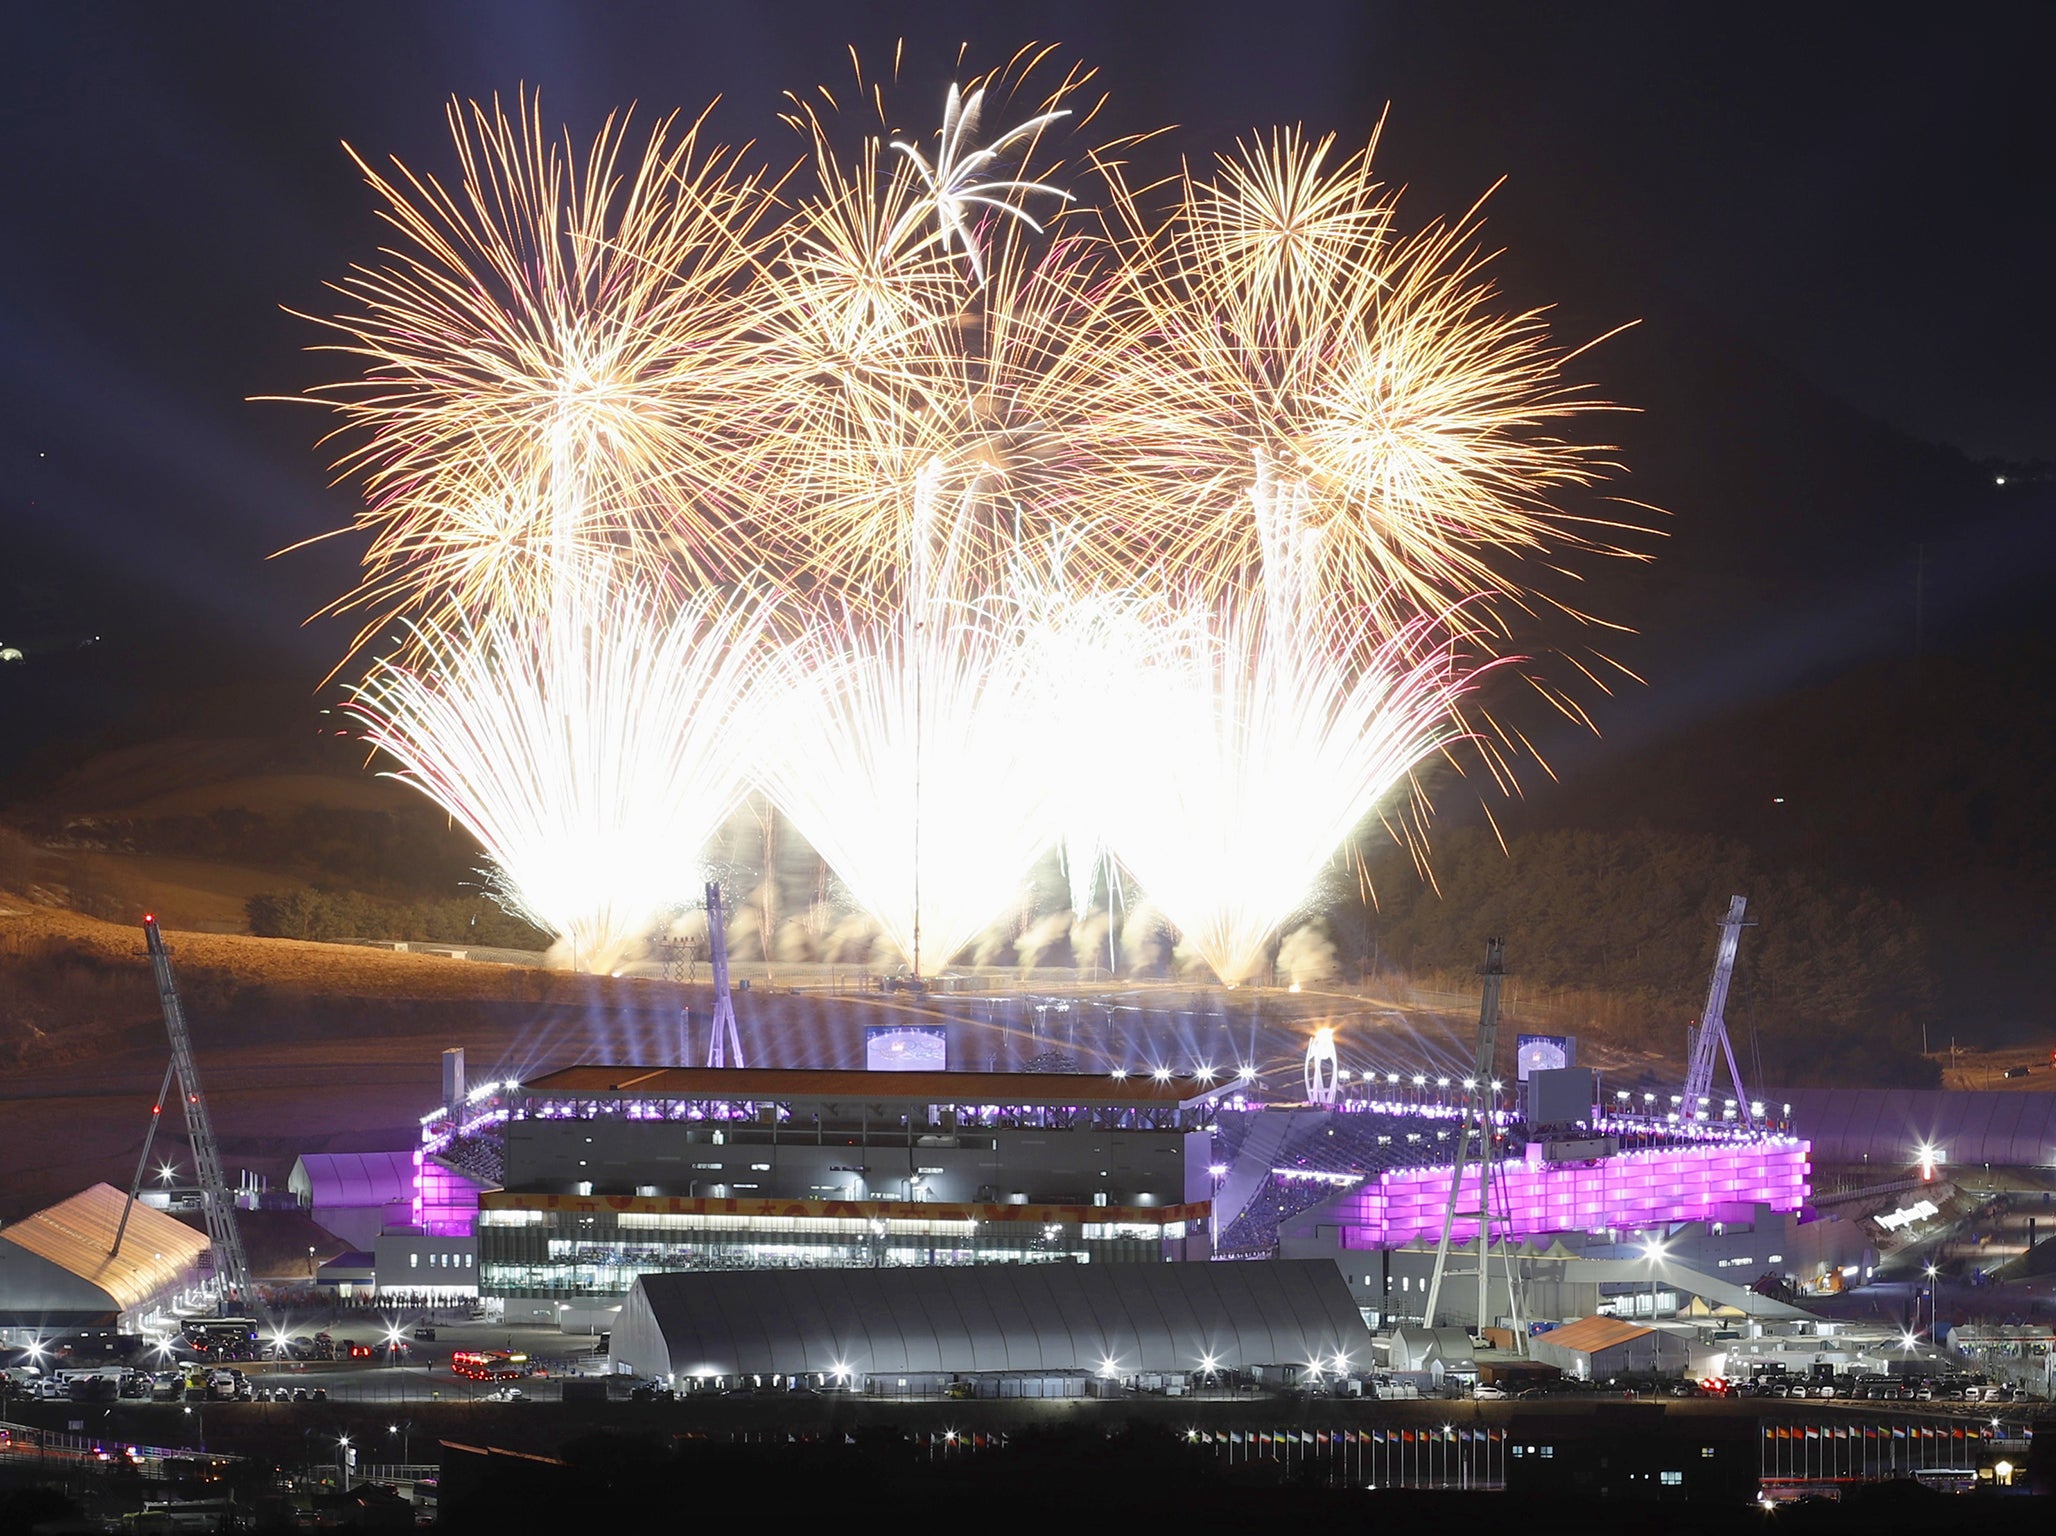 Fireworks light up the sky over the Pyeongchang Olympic Stadium during the closing ceremony